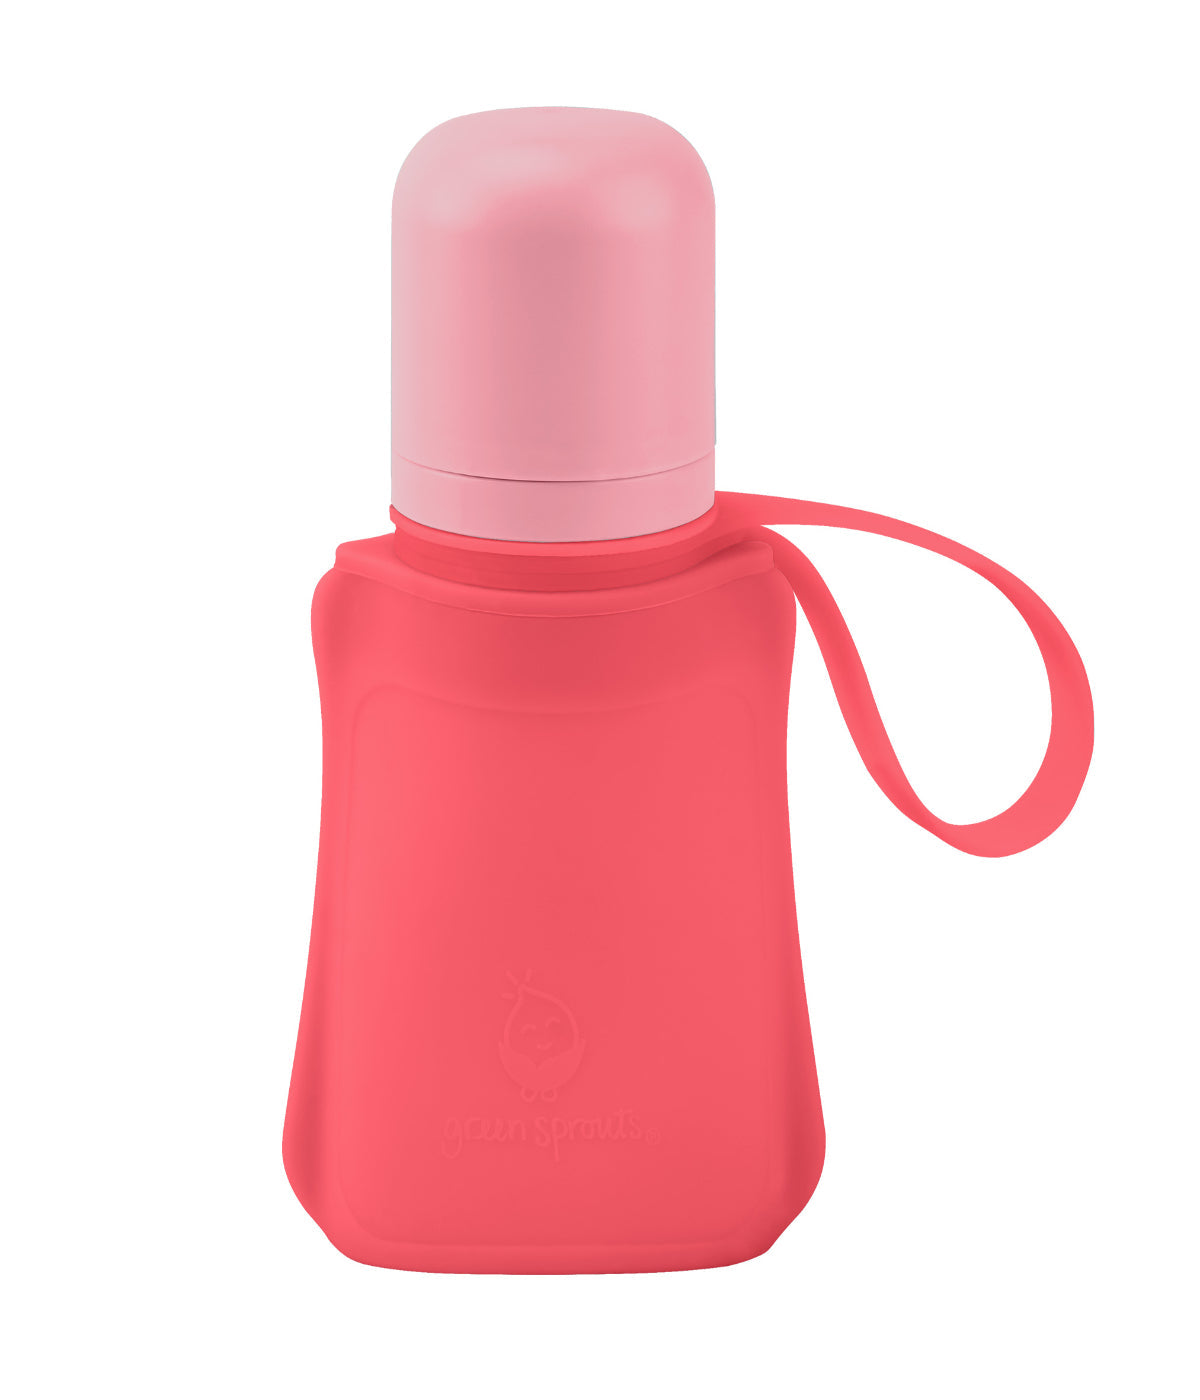 Sprout Ware Sip Straw Pocket made from Silicone and Plants 8oz Pink